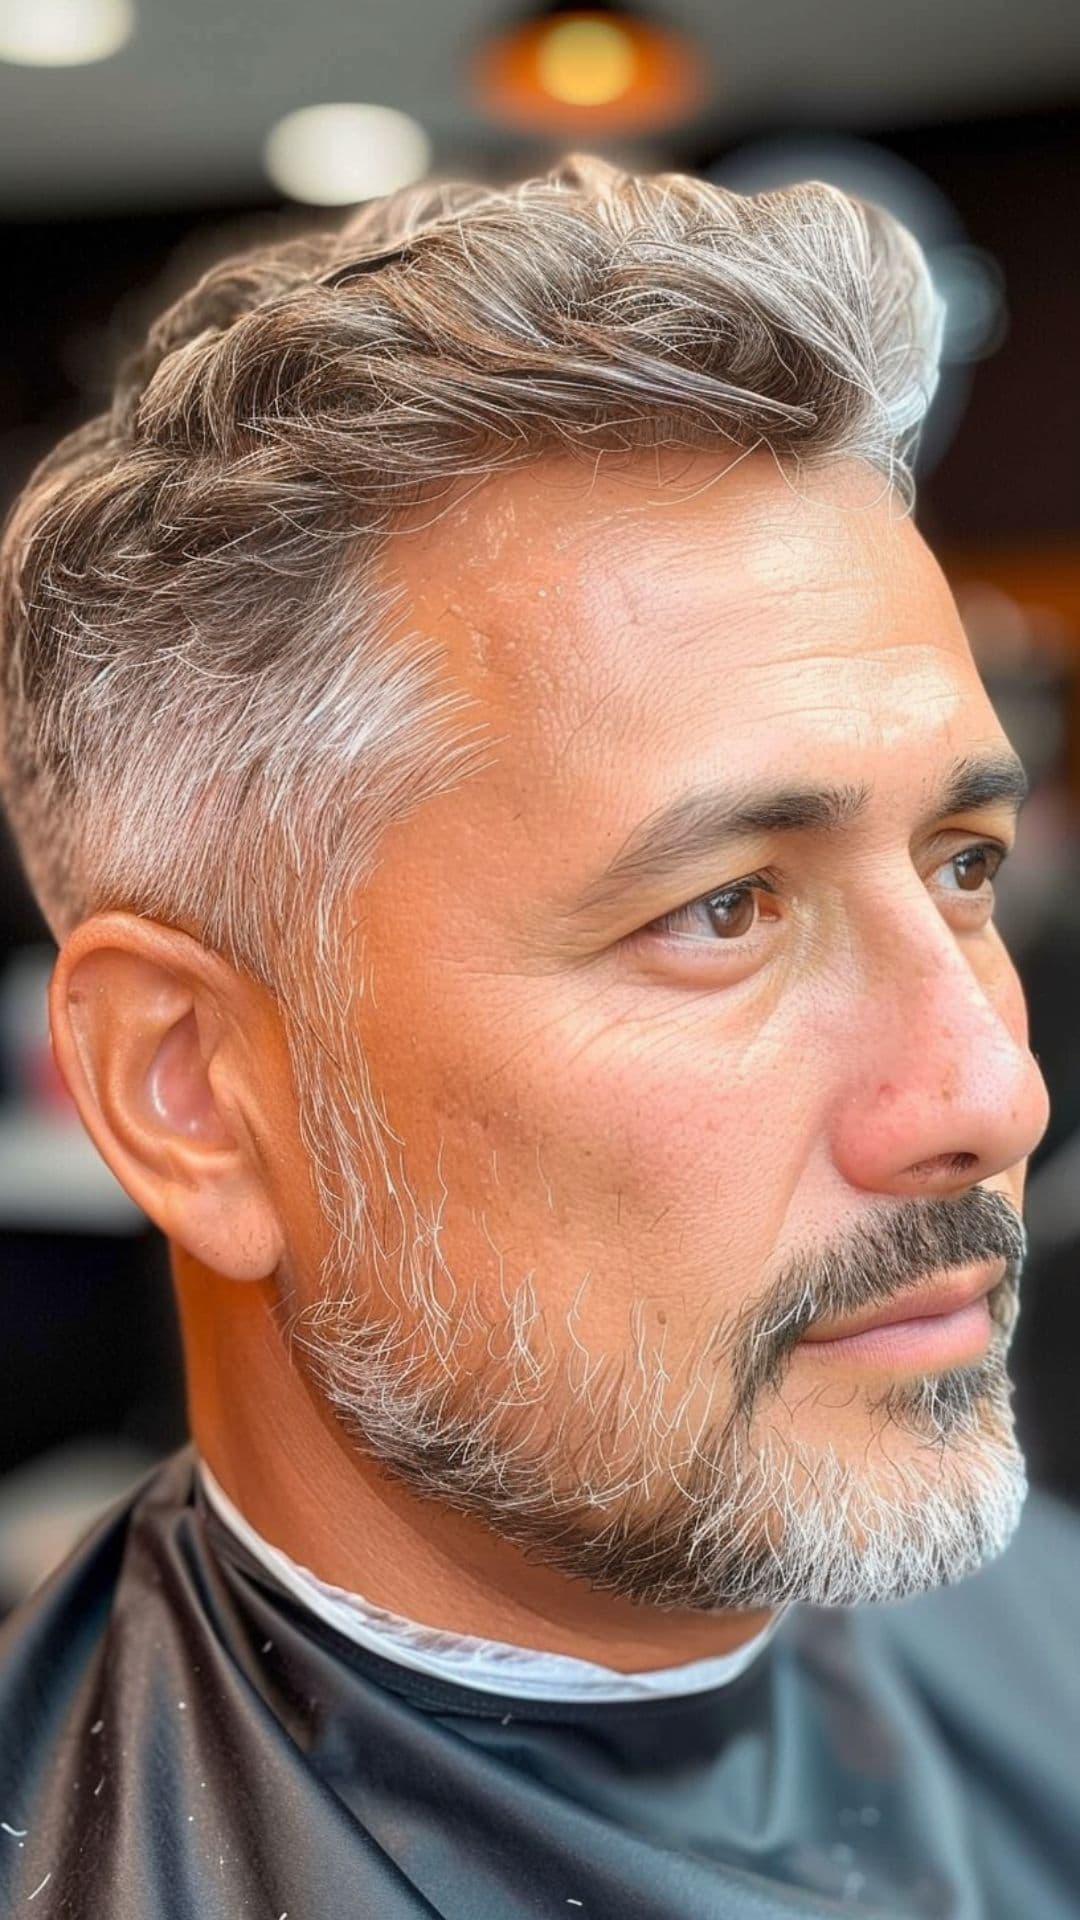 A middle aged man modelling a clipper haircut.